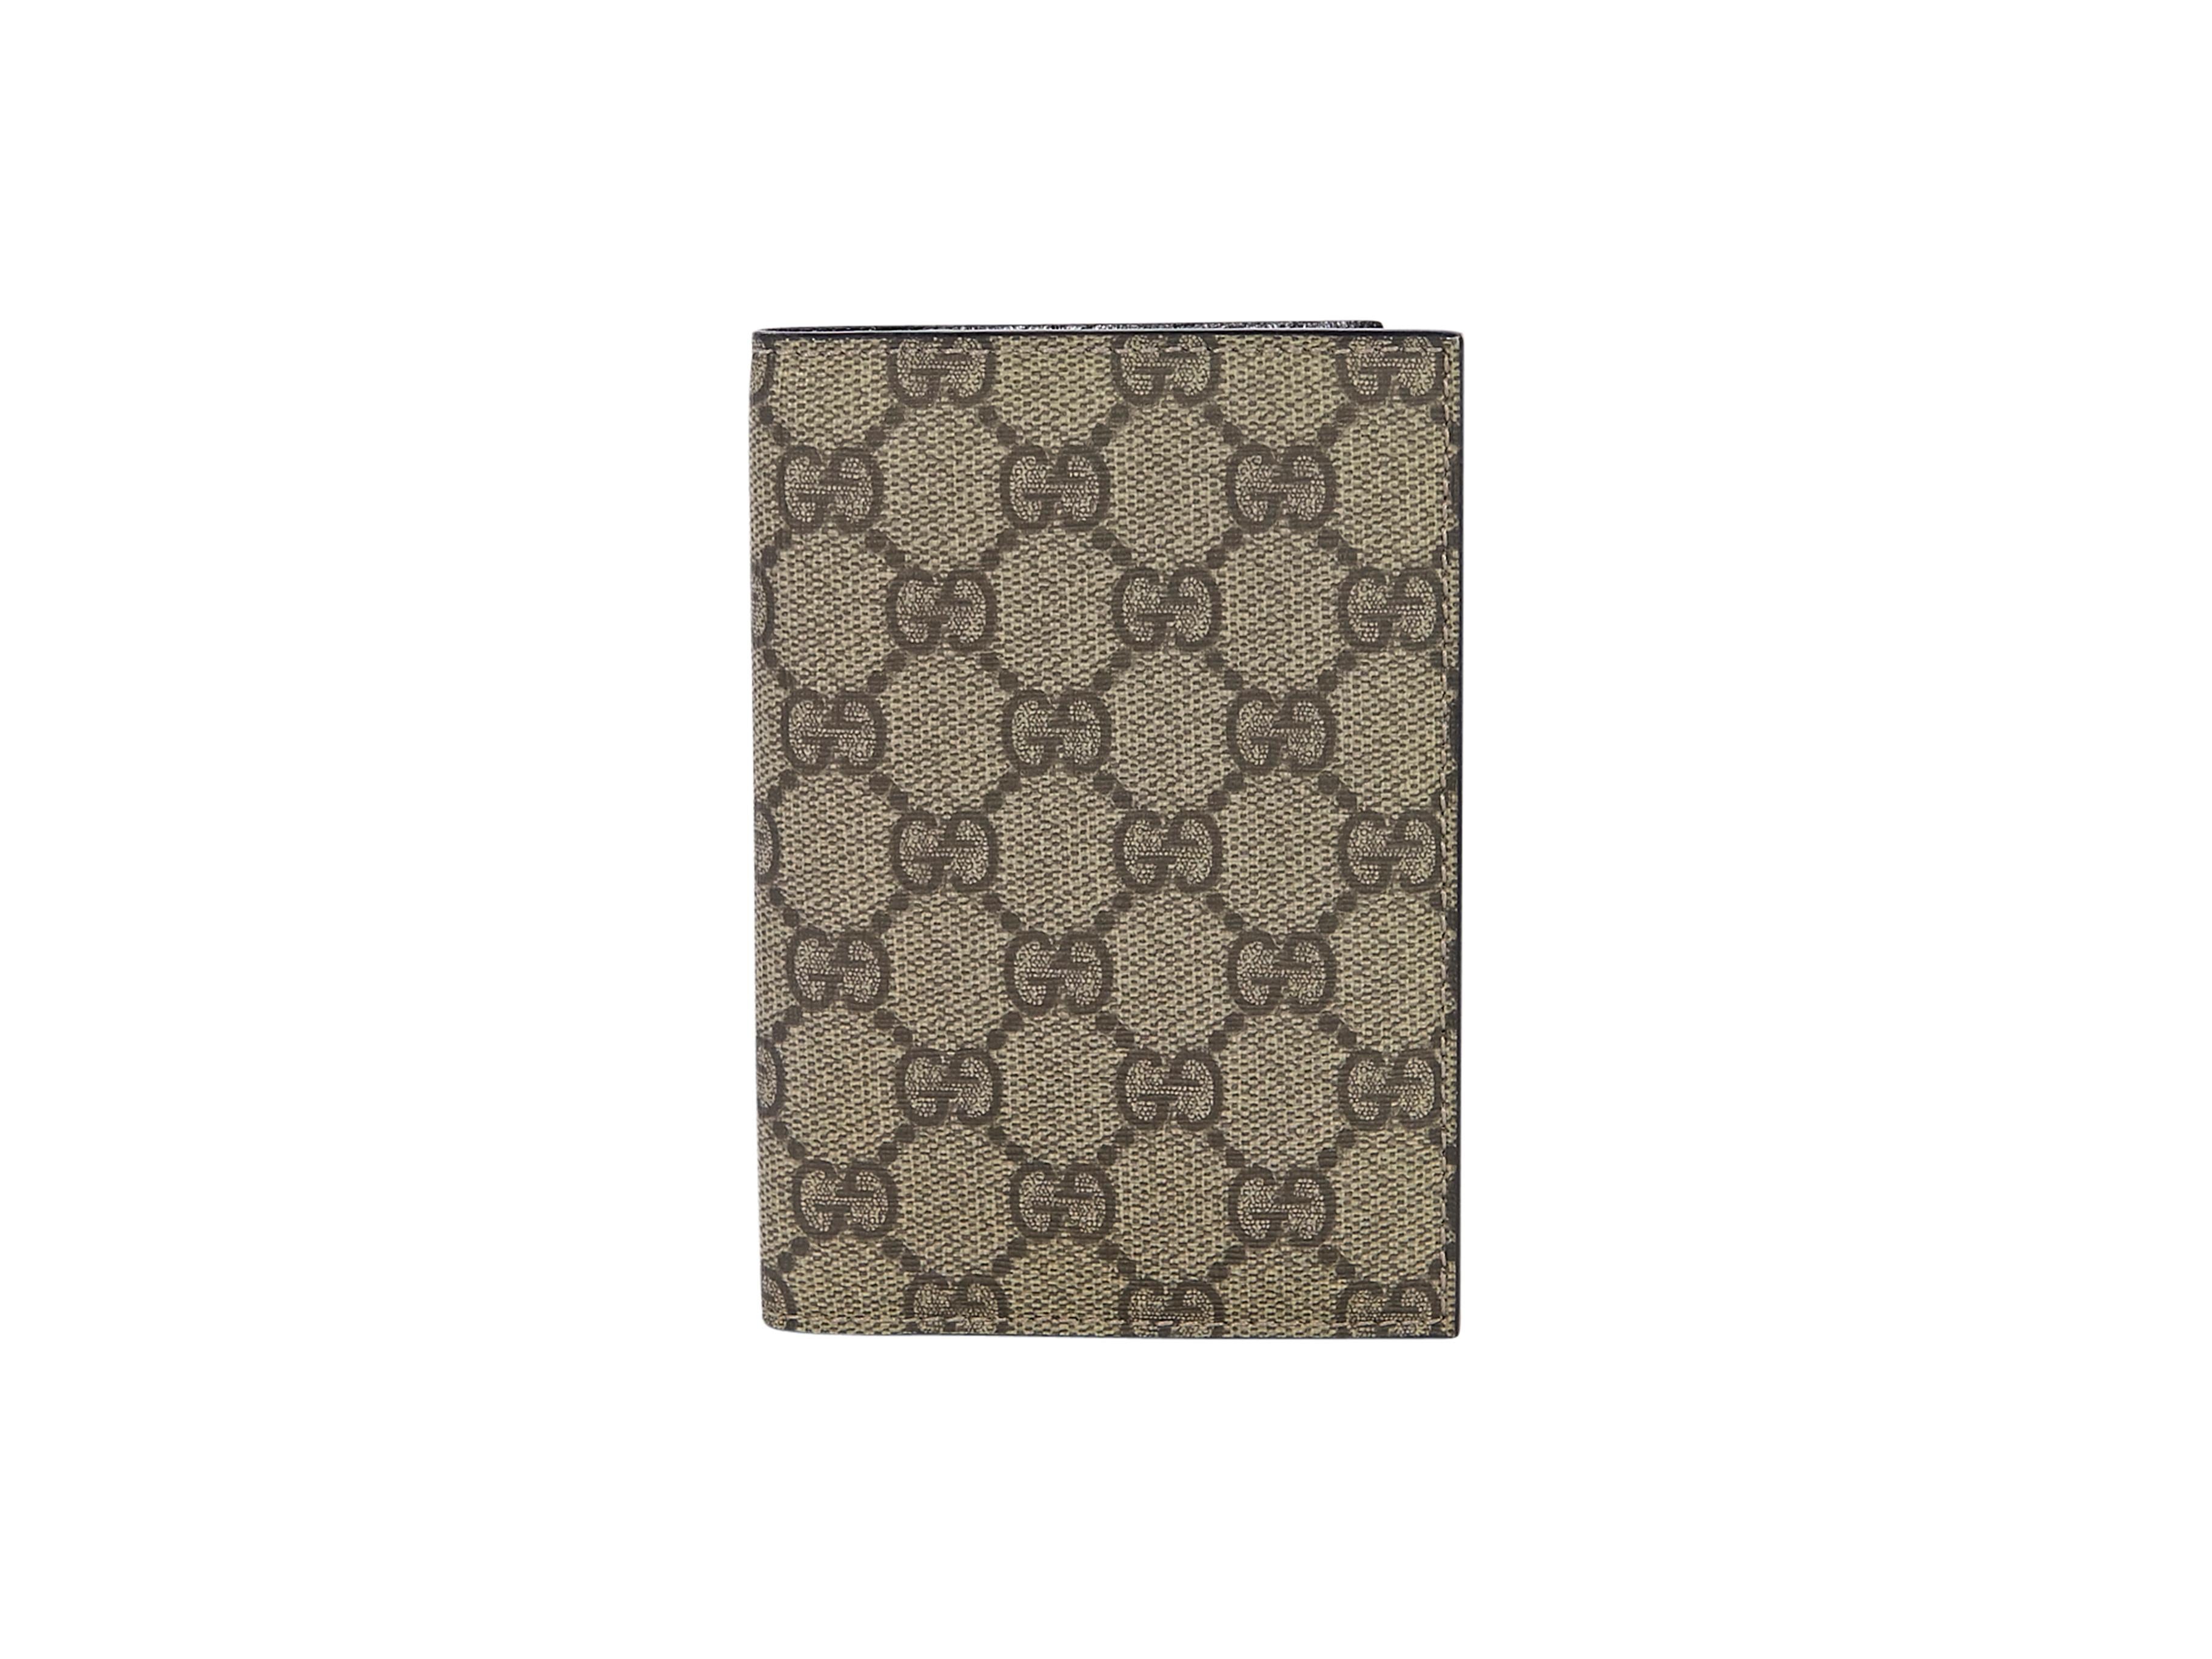 Product details:  Brown GG bifold wallet by Gucci.  Lined interior with multiple credit card slots.  6